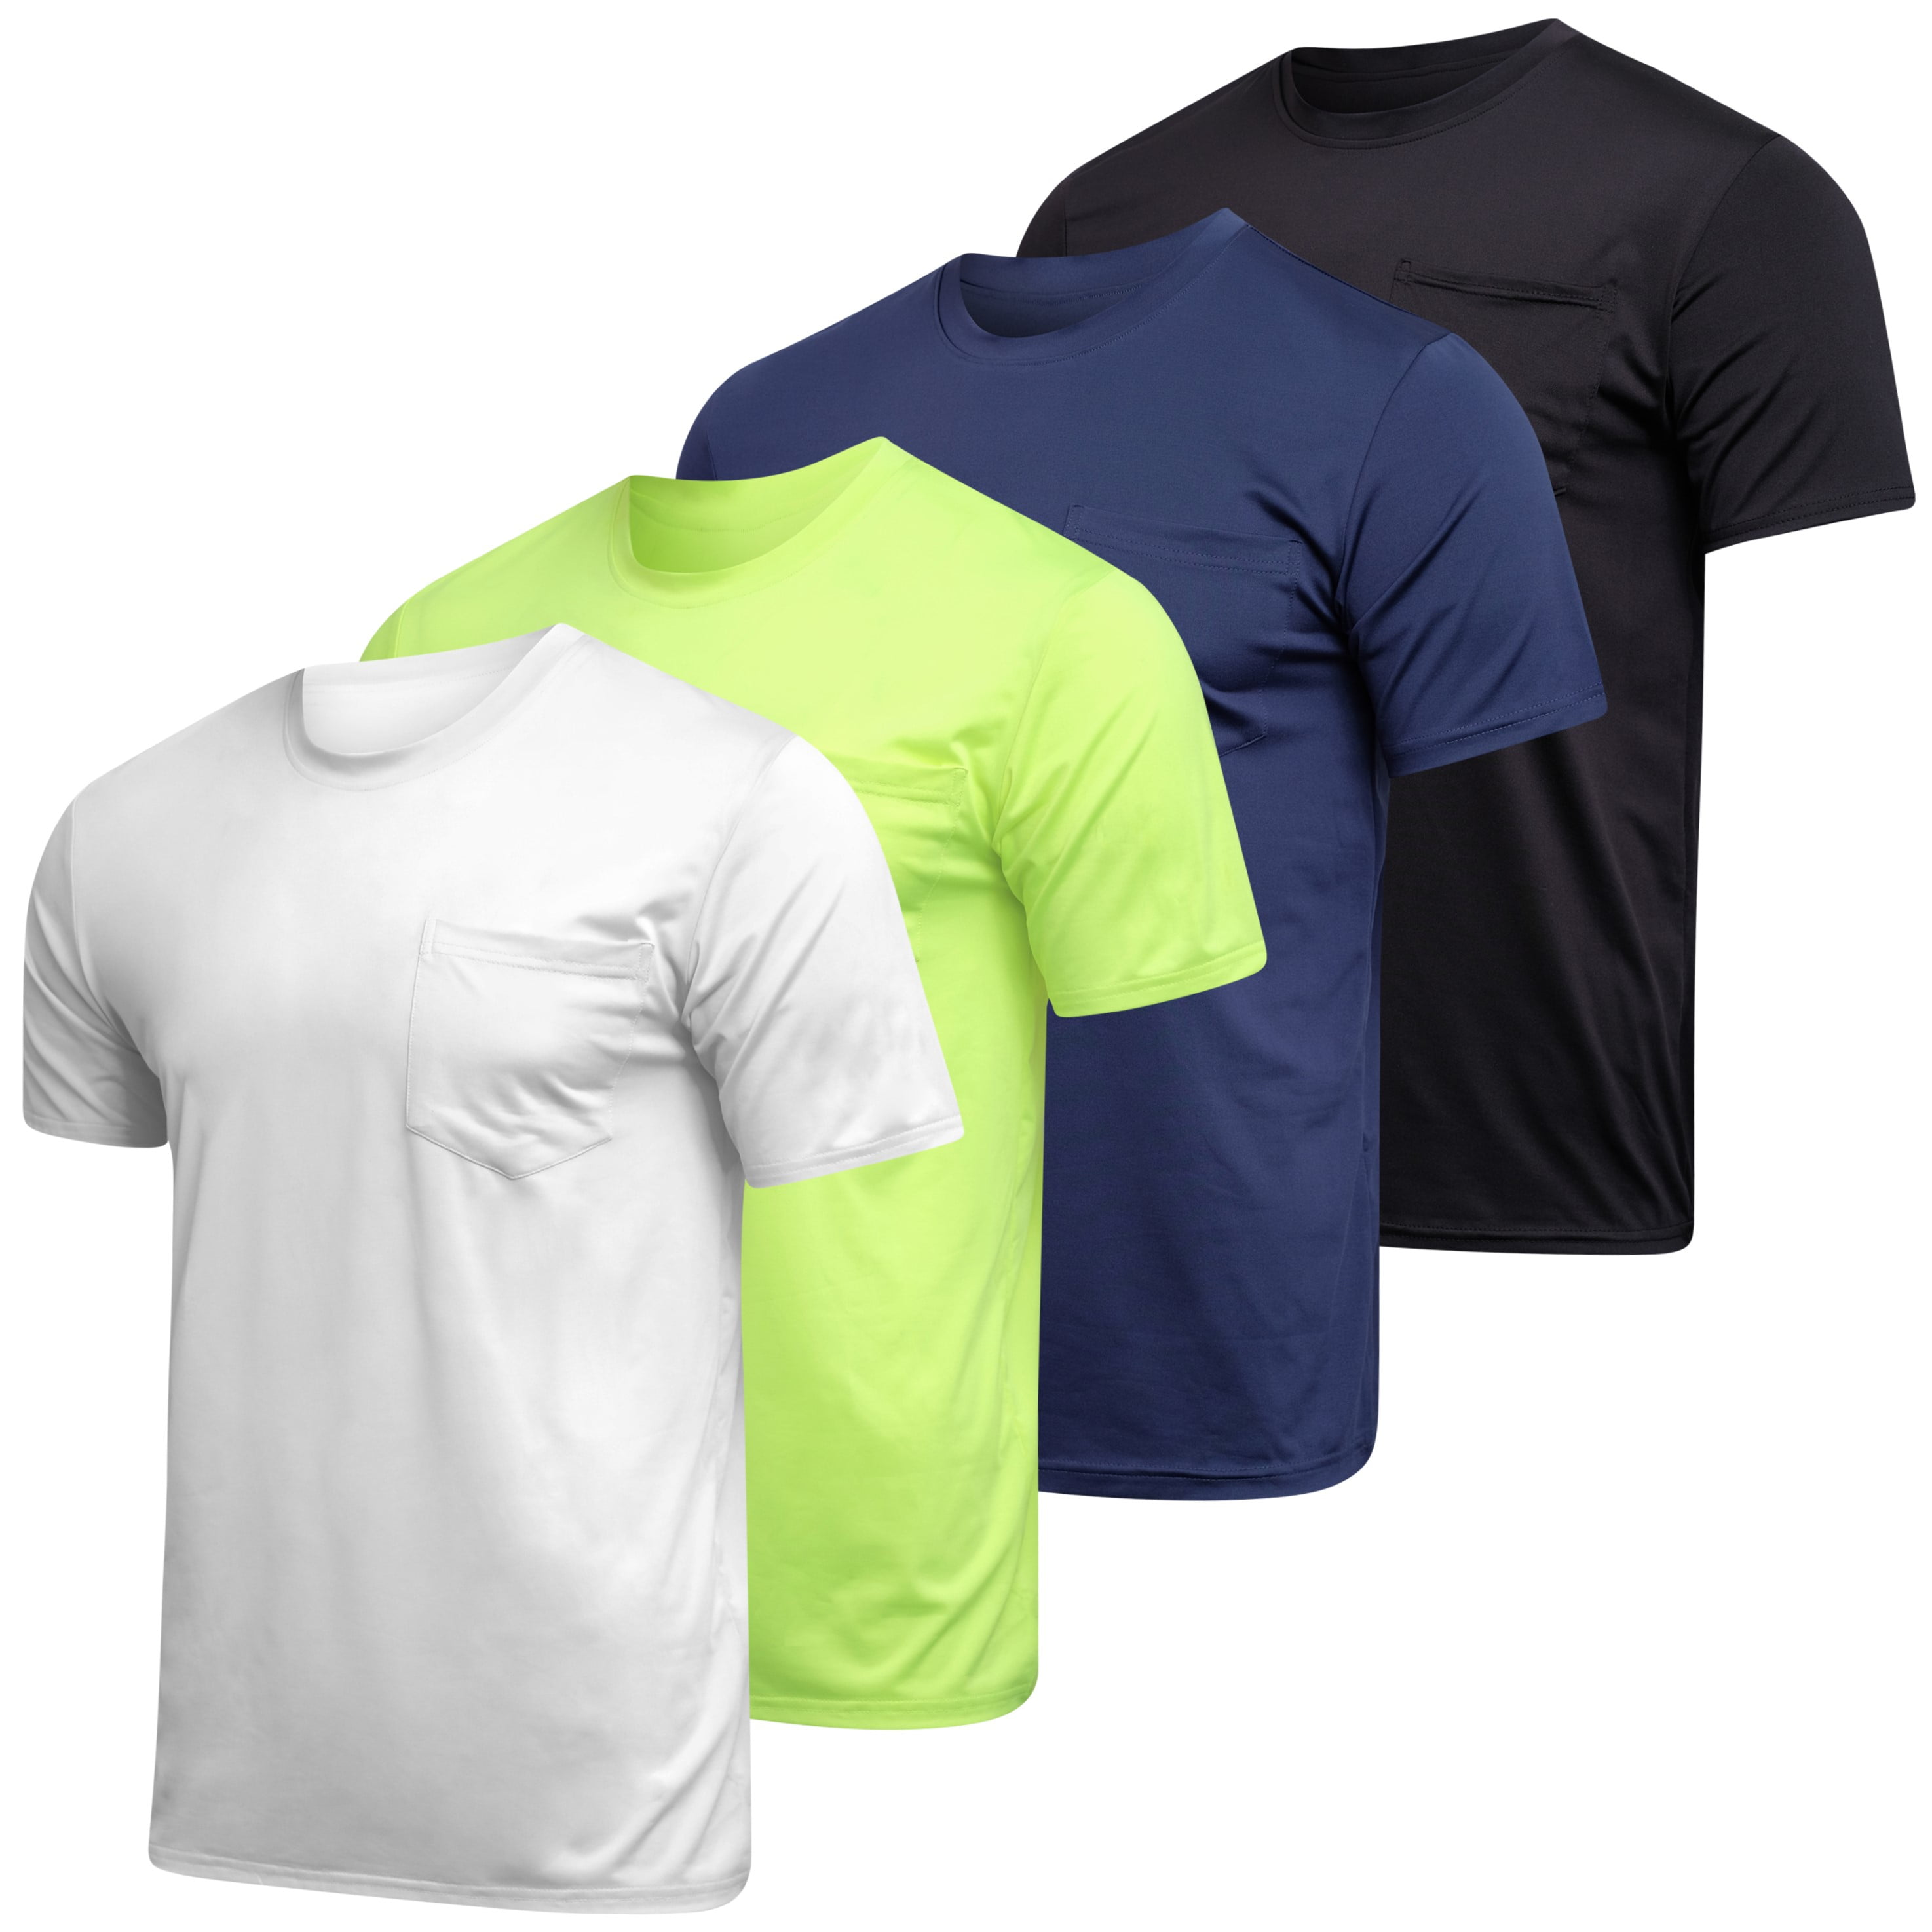 4-Pack: Mens Dry-Fit Moisture Wicking Active Athletic Performance Short ...